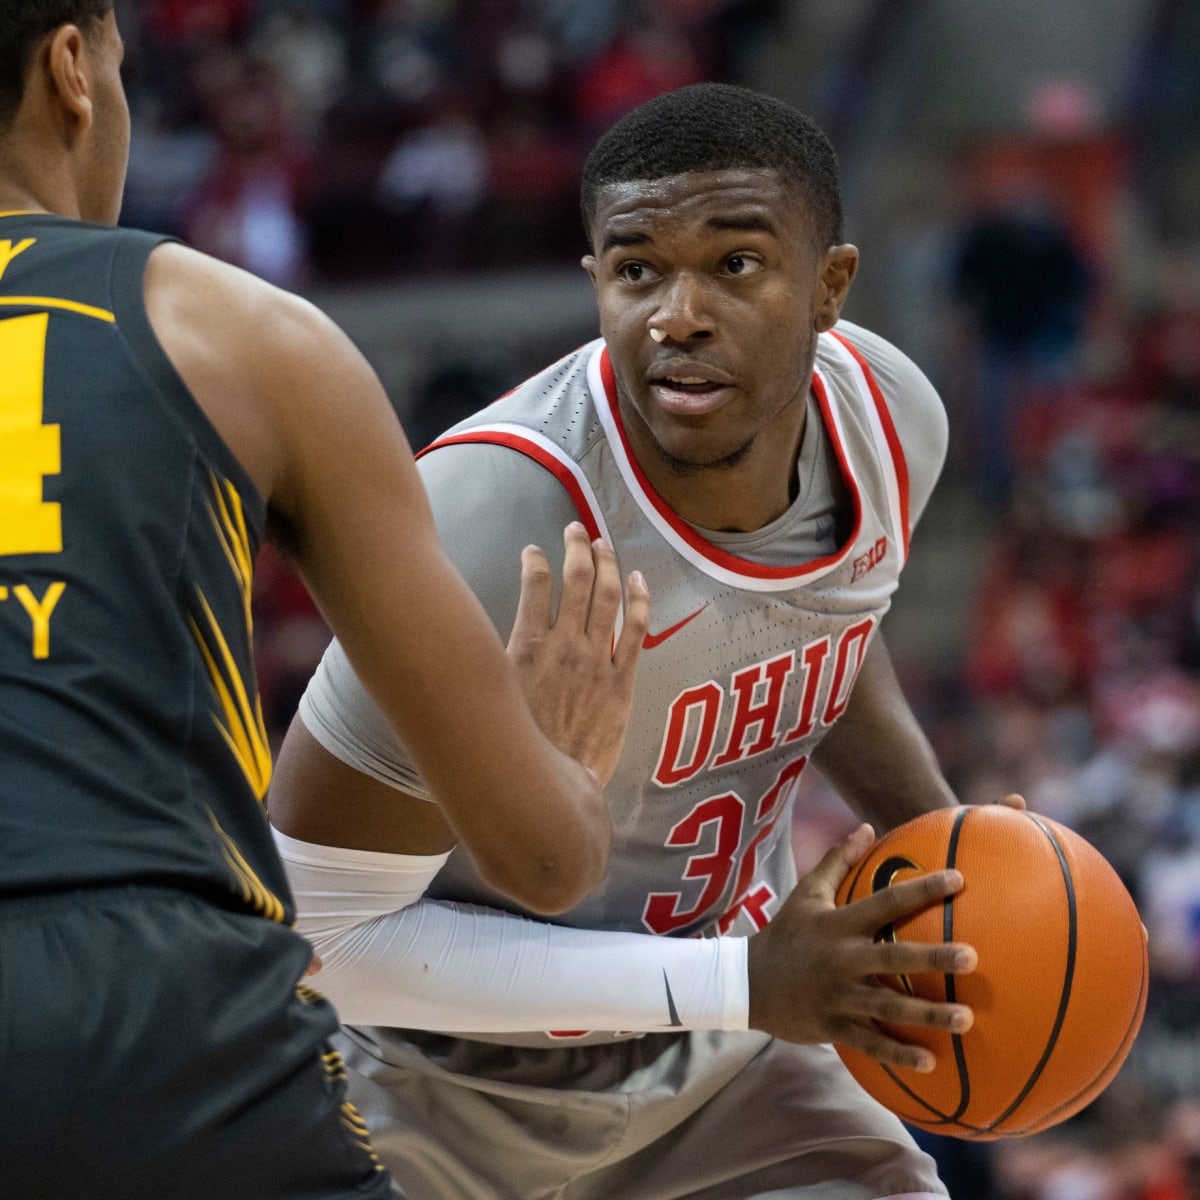 Photos From Ohio State's 71-66 Win Over Duke - Sports Illustrated